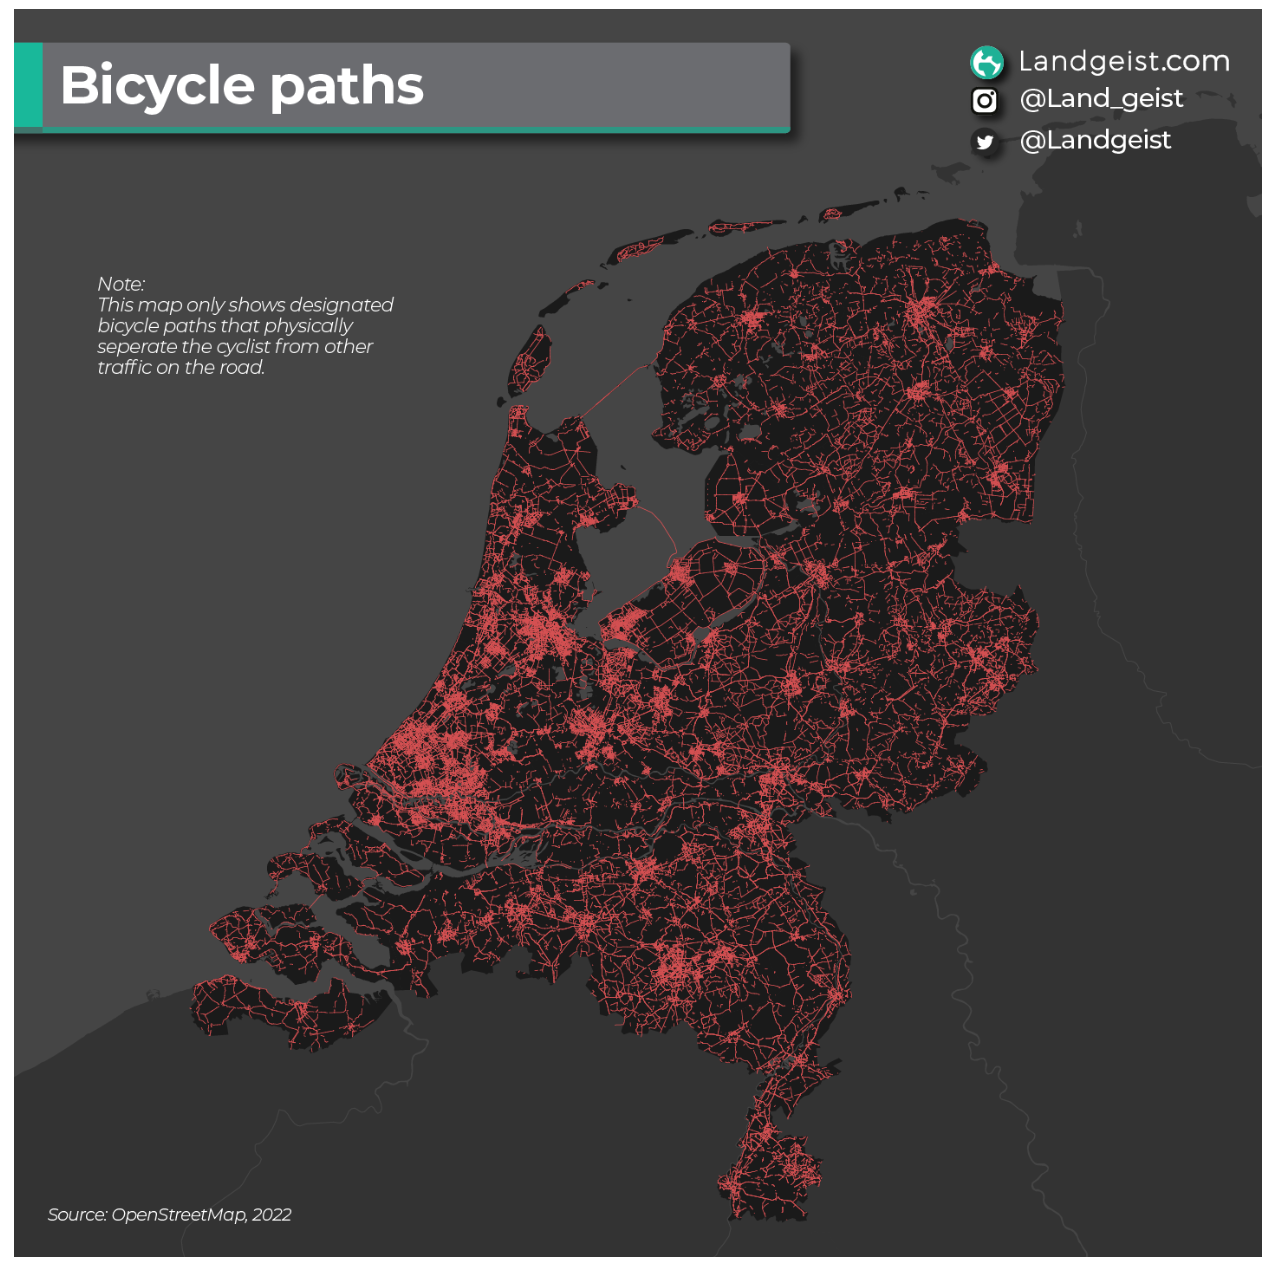 Bicycle paths in the Netherlands